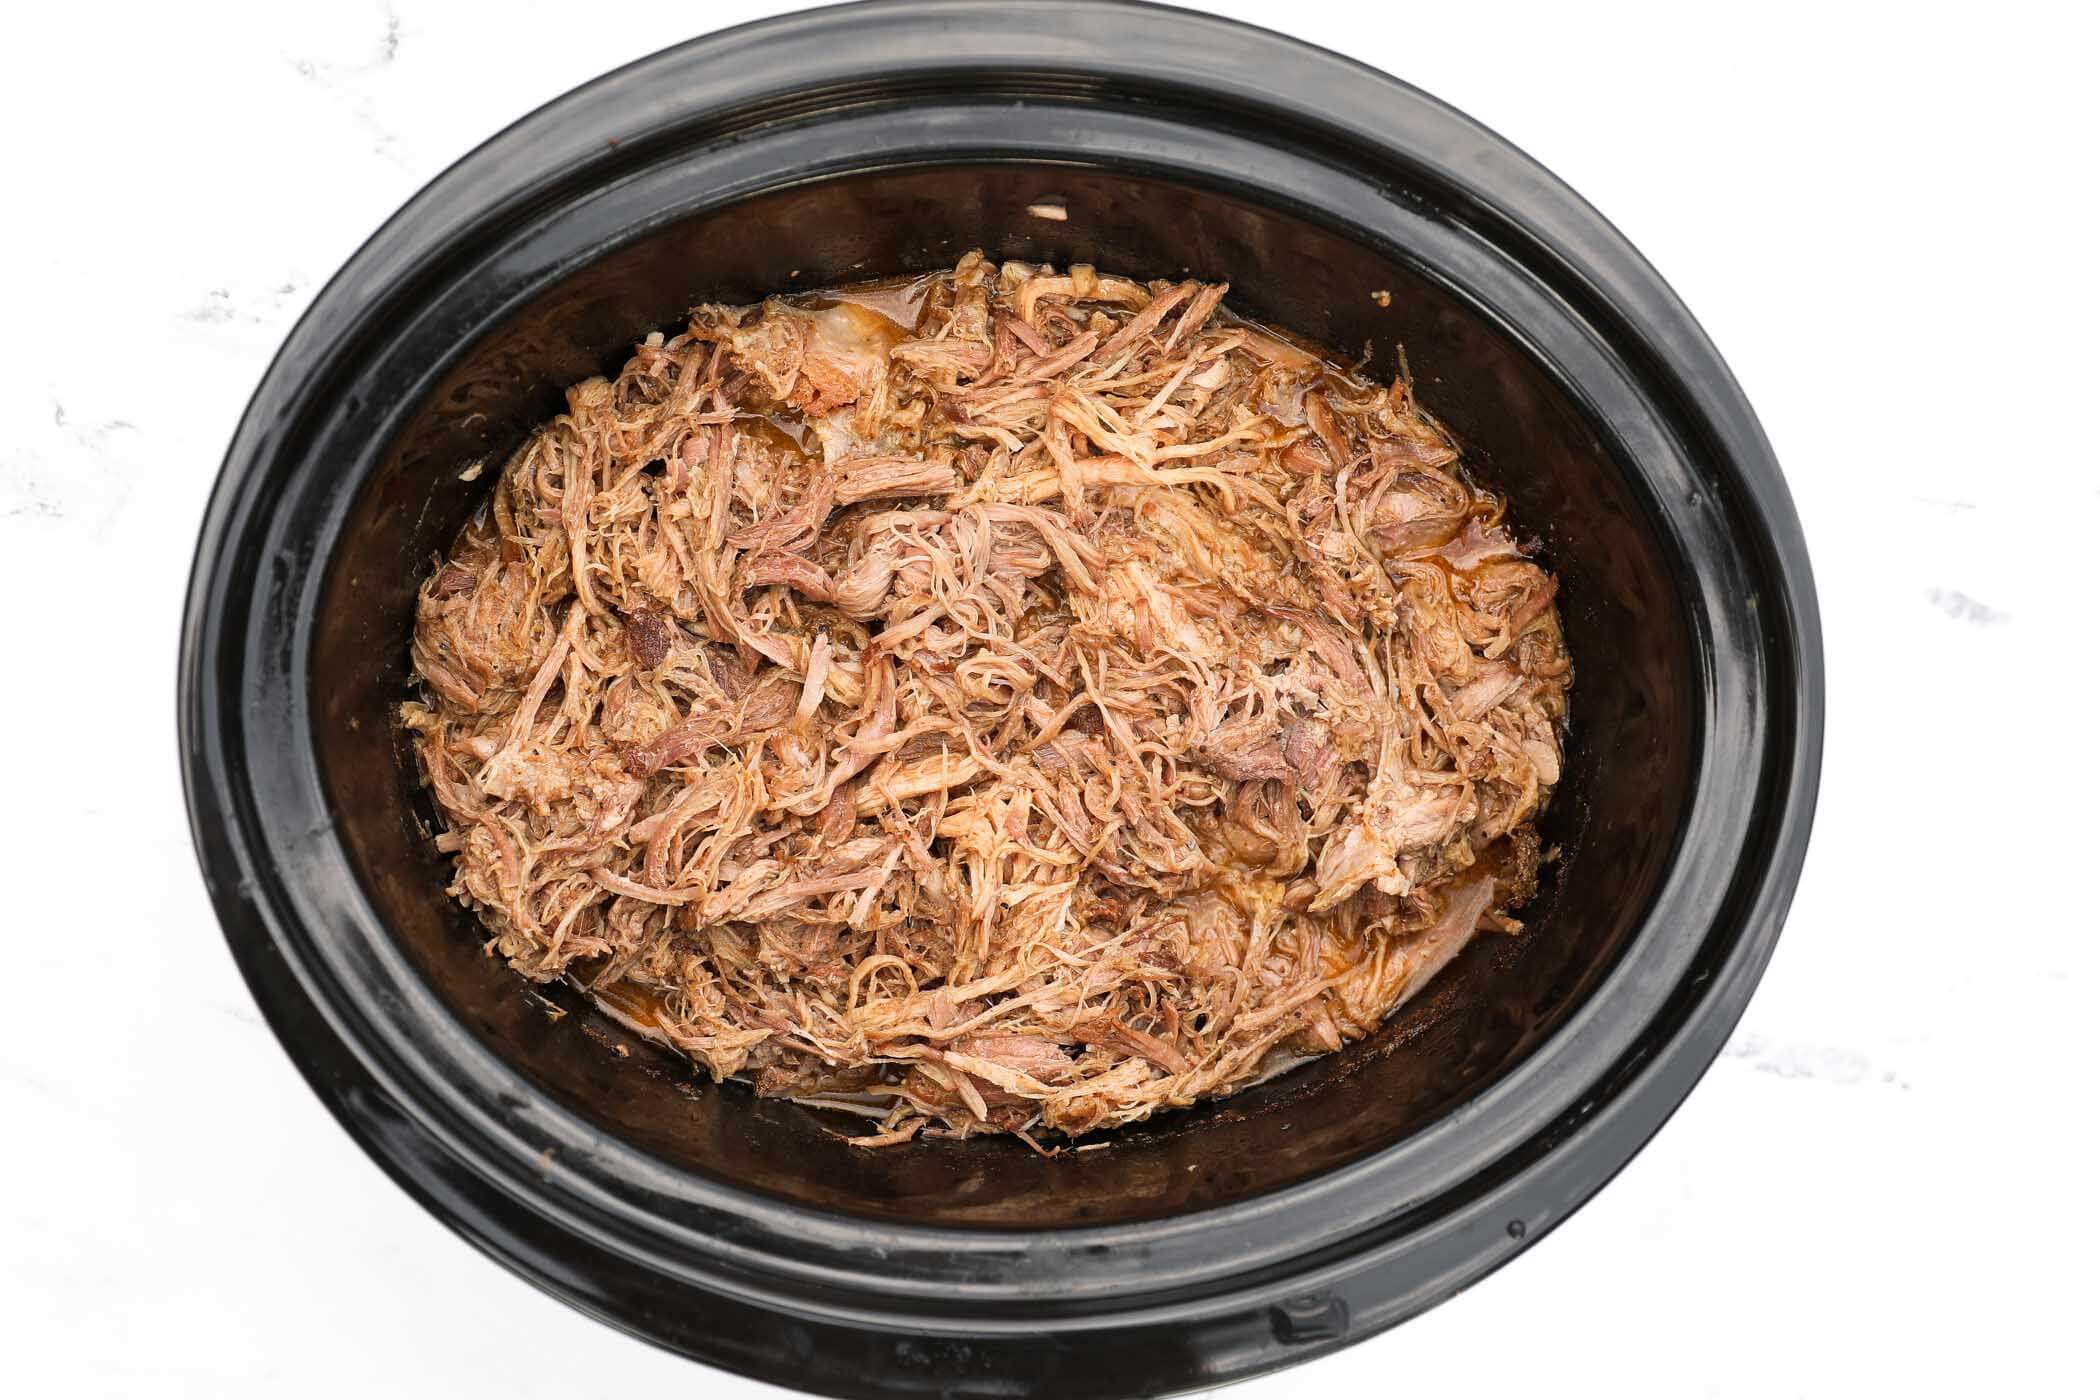 Slow Cooker Pulled Pork - Lexi's Clean Kitchen